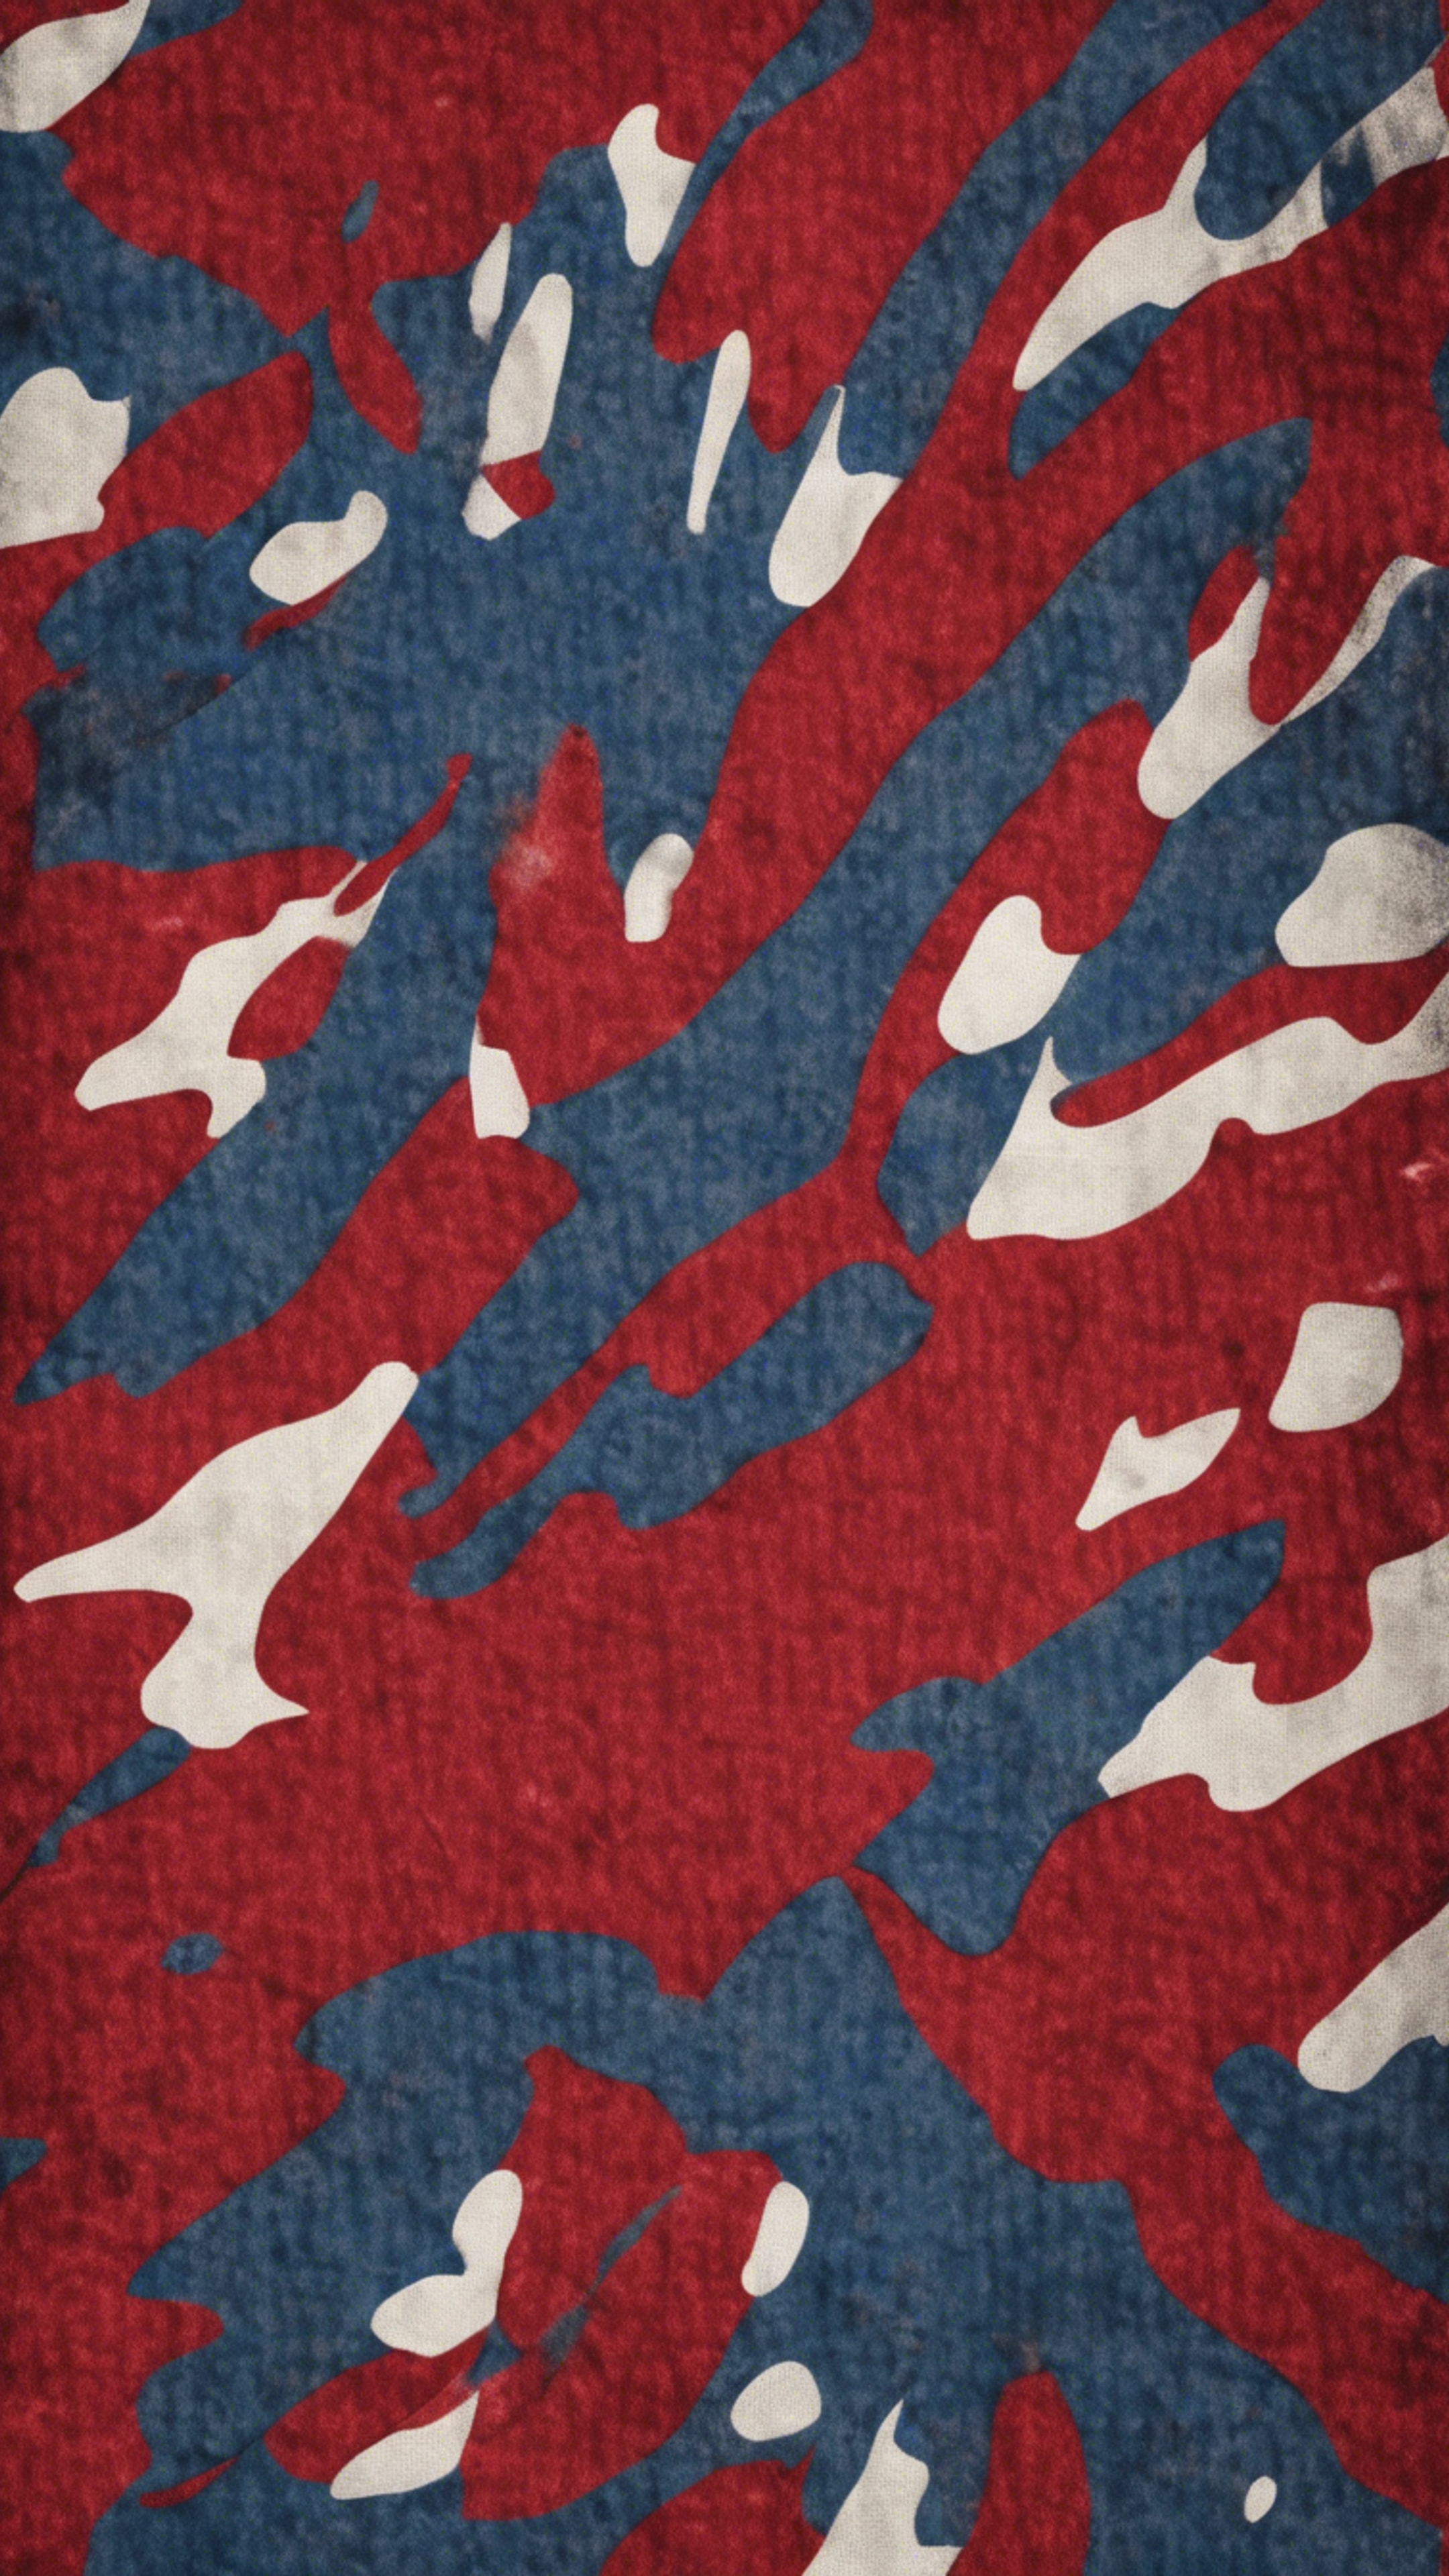 Red and blue camouflage pattern used in navy uniforms.壁紙[01ccfb252ca748fab57f]